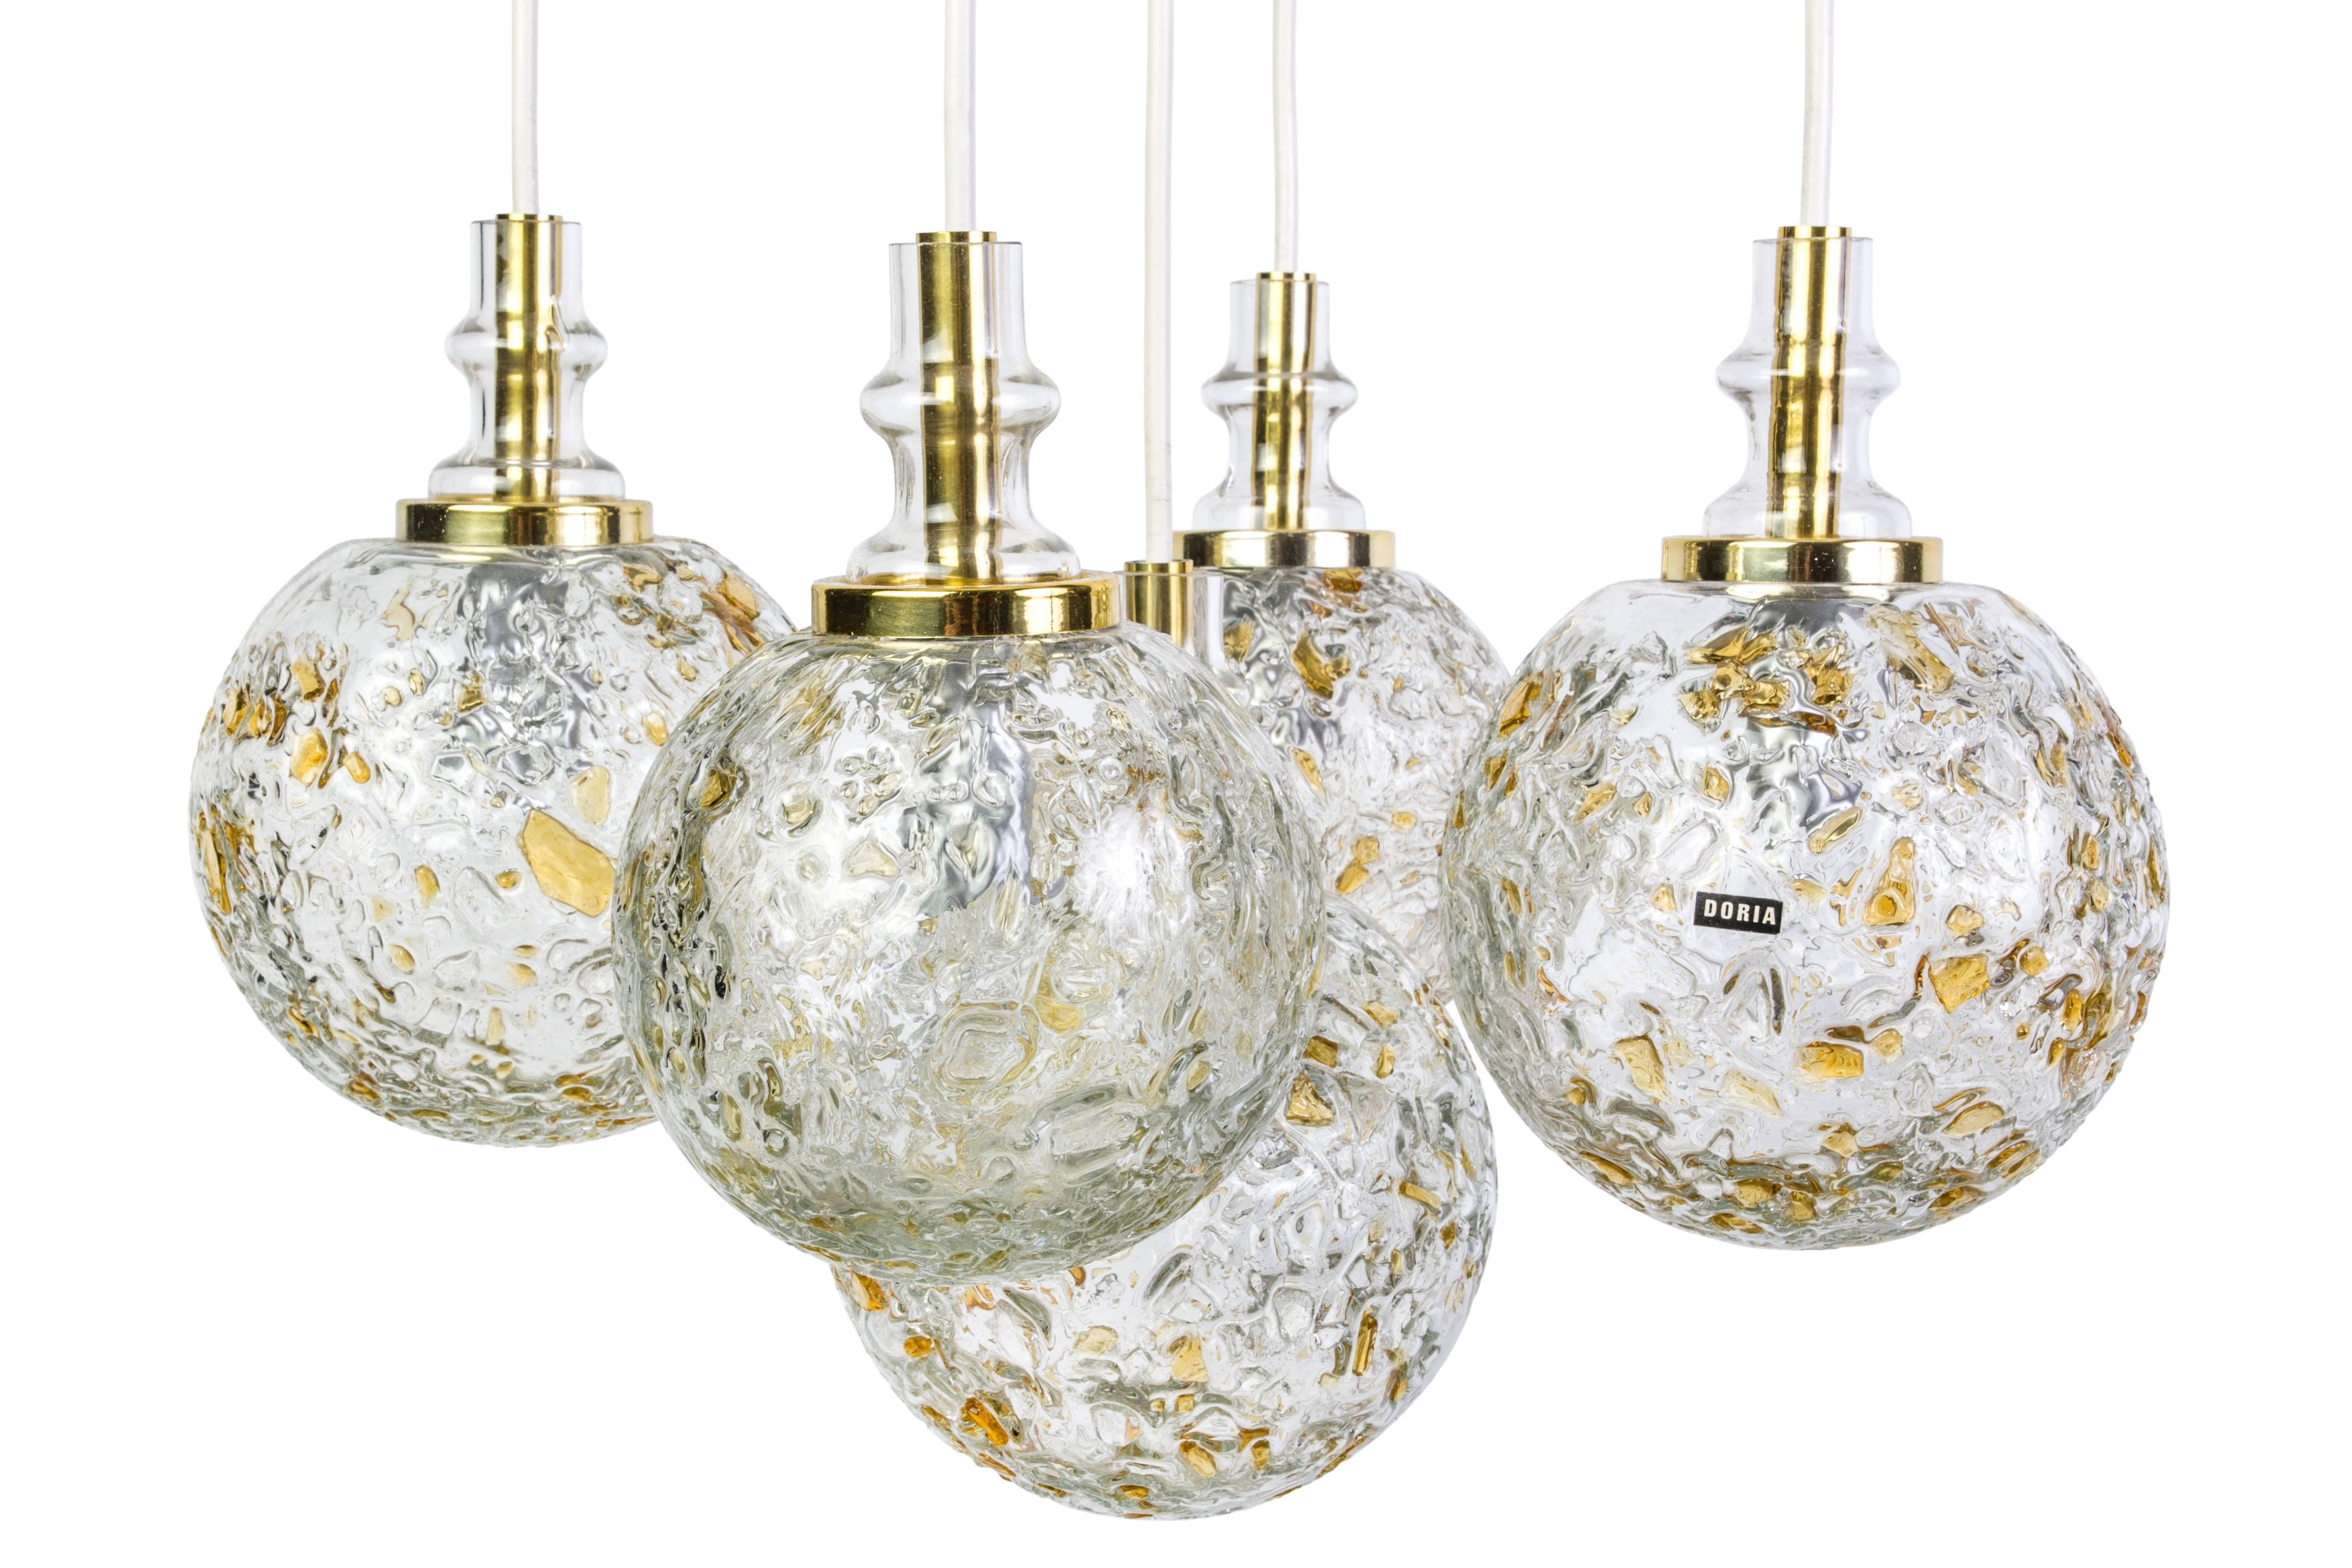 This superb ceiling pendant by Doria features five cascading Murano glass balls in excellent original condition. The beautiful corrugated blown glass shades provide the perfect filtered light and disguise for the bulbs.

Measures: Diameter glass